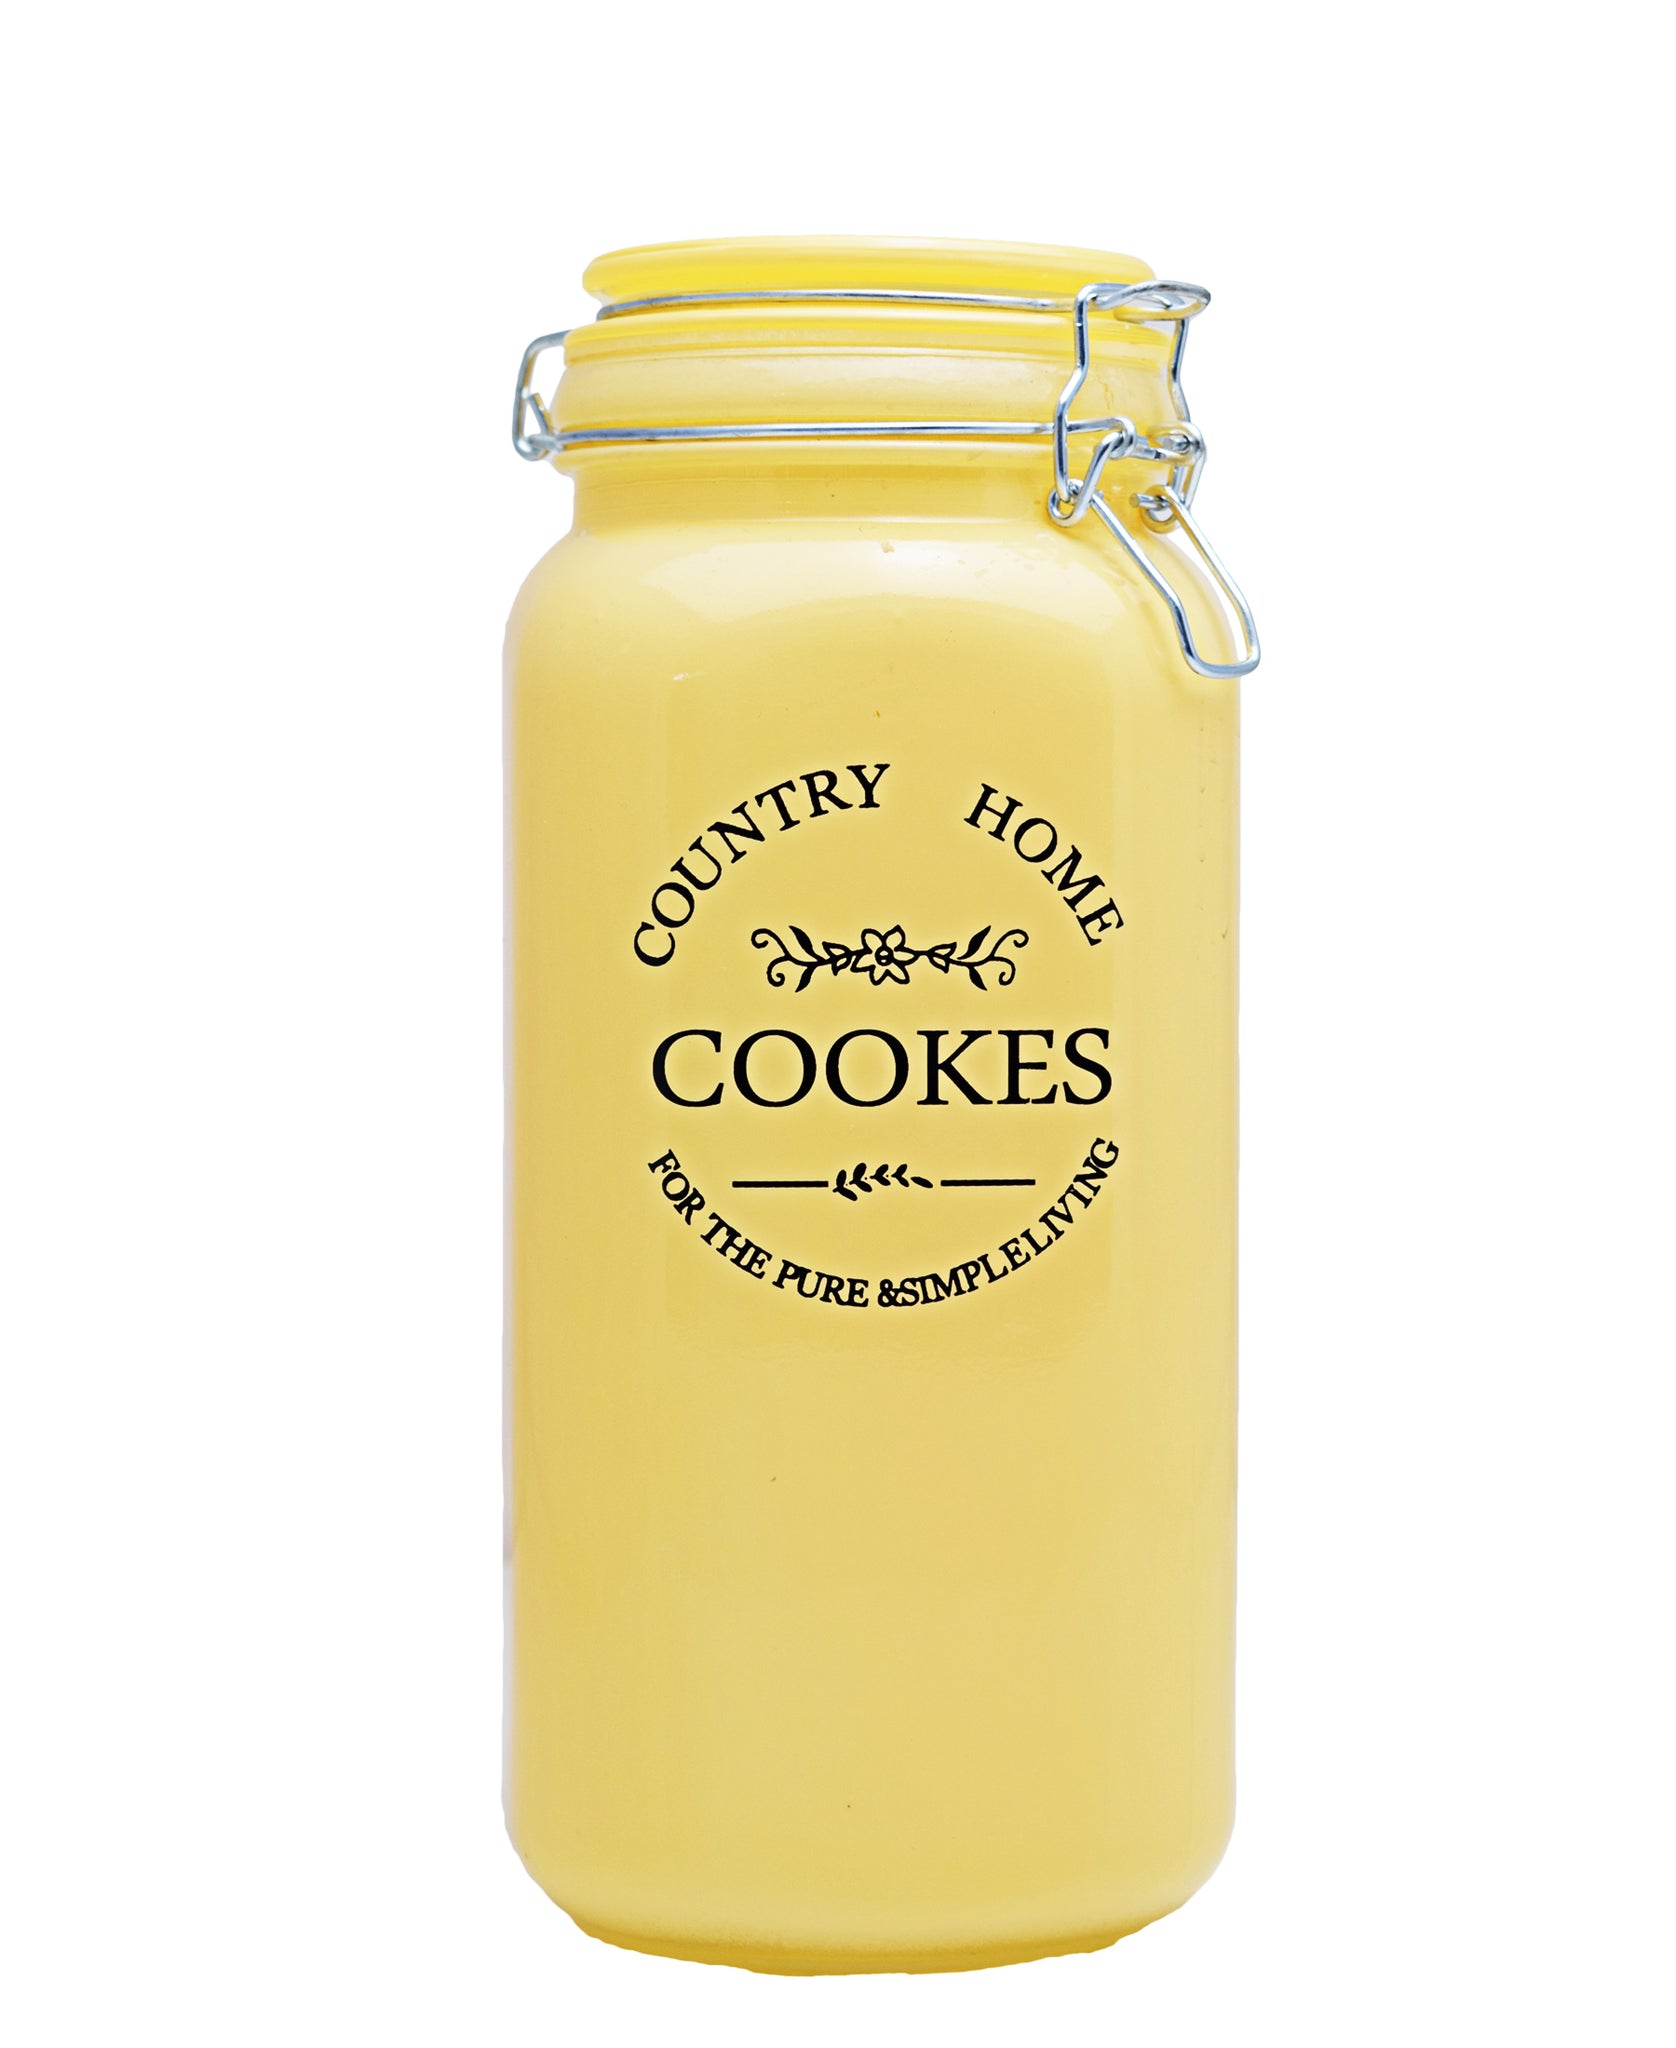 Country Home Cookies Large Jar - Cream